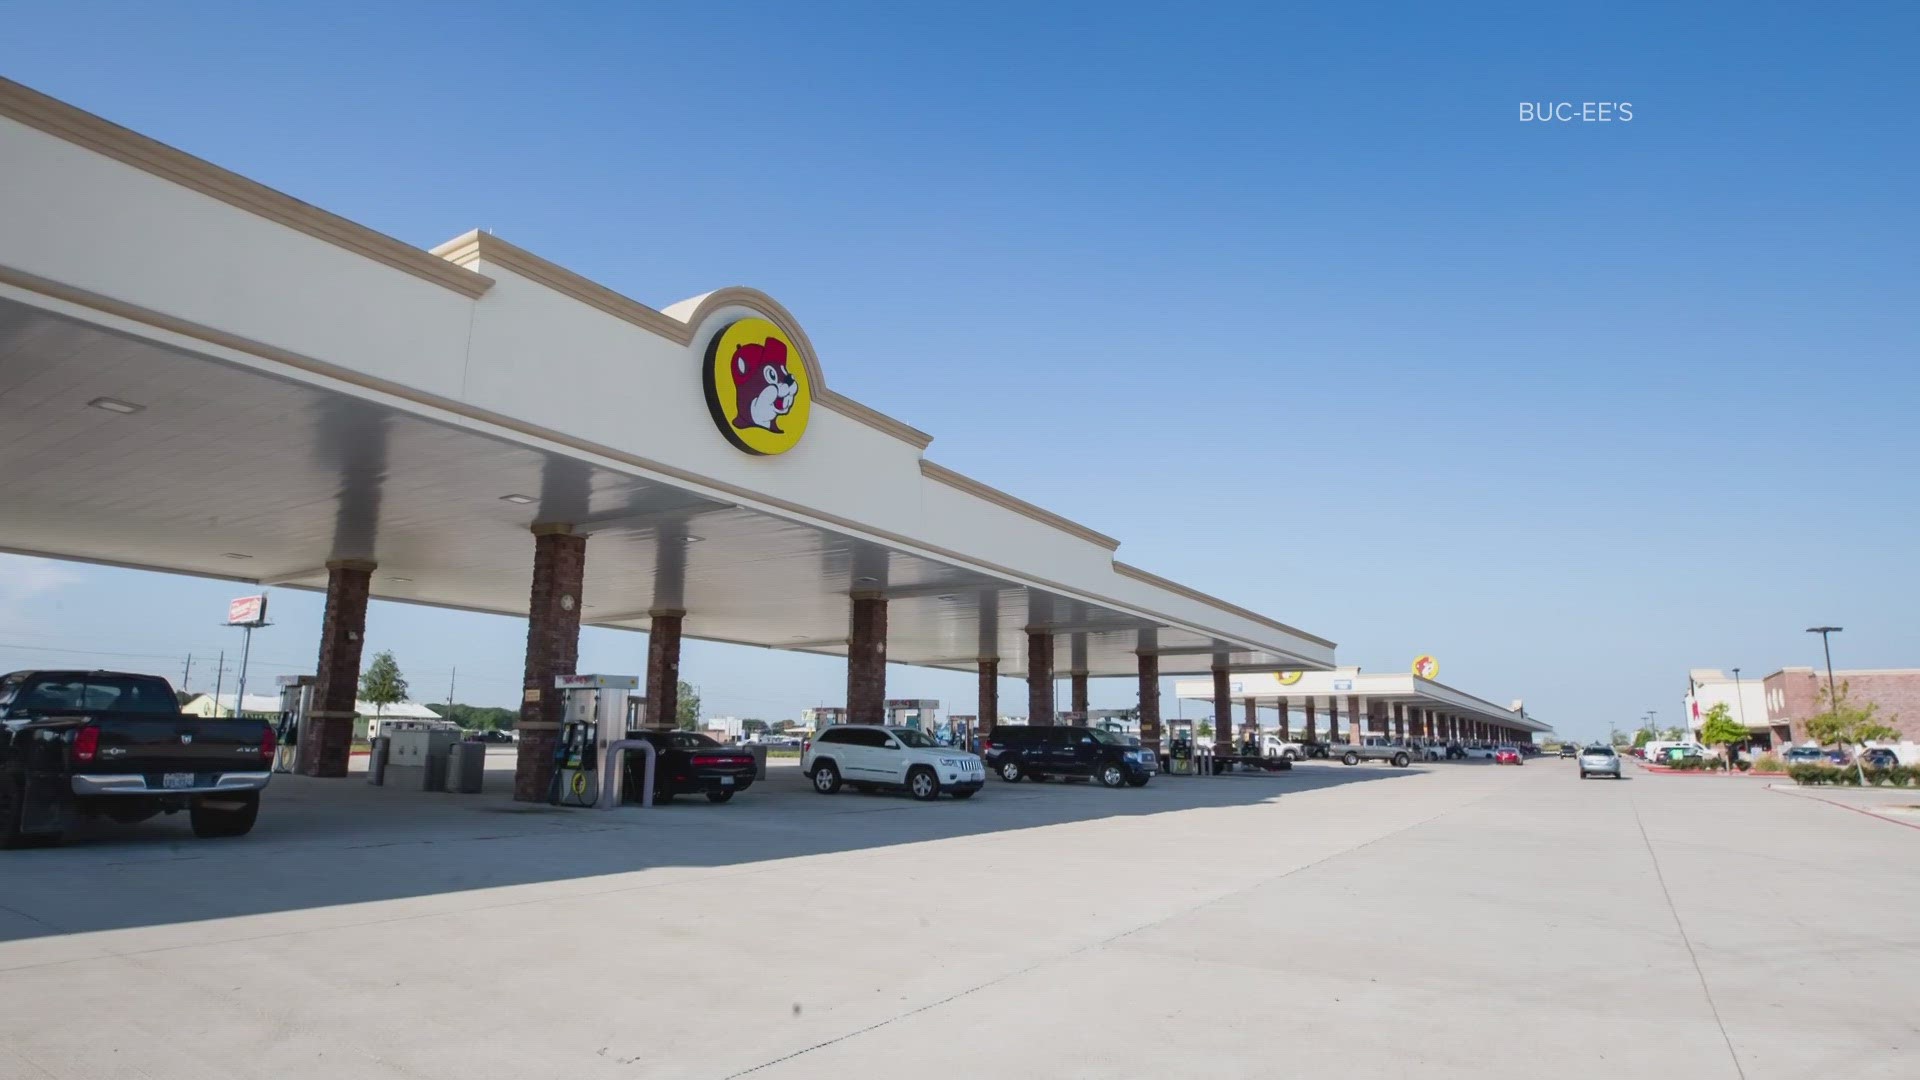 Texas-based country store and gas station chain Buc-ee's is opening its first location in Colorado. Here are the details for its grand opening.